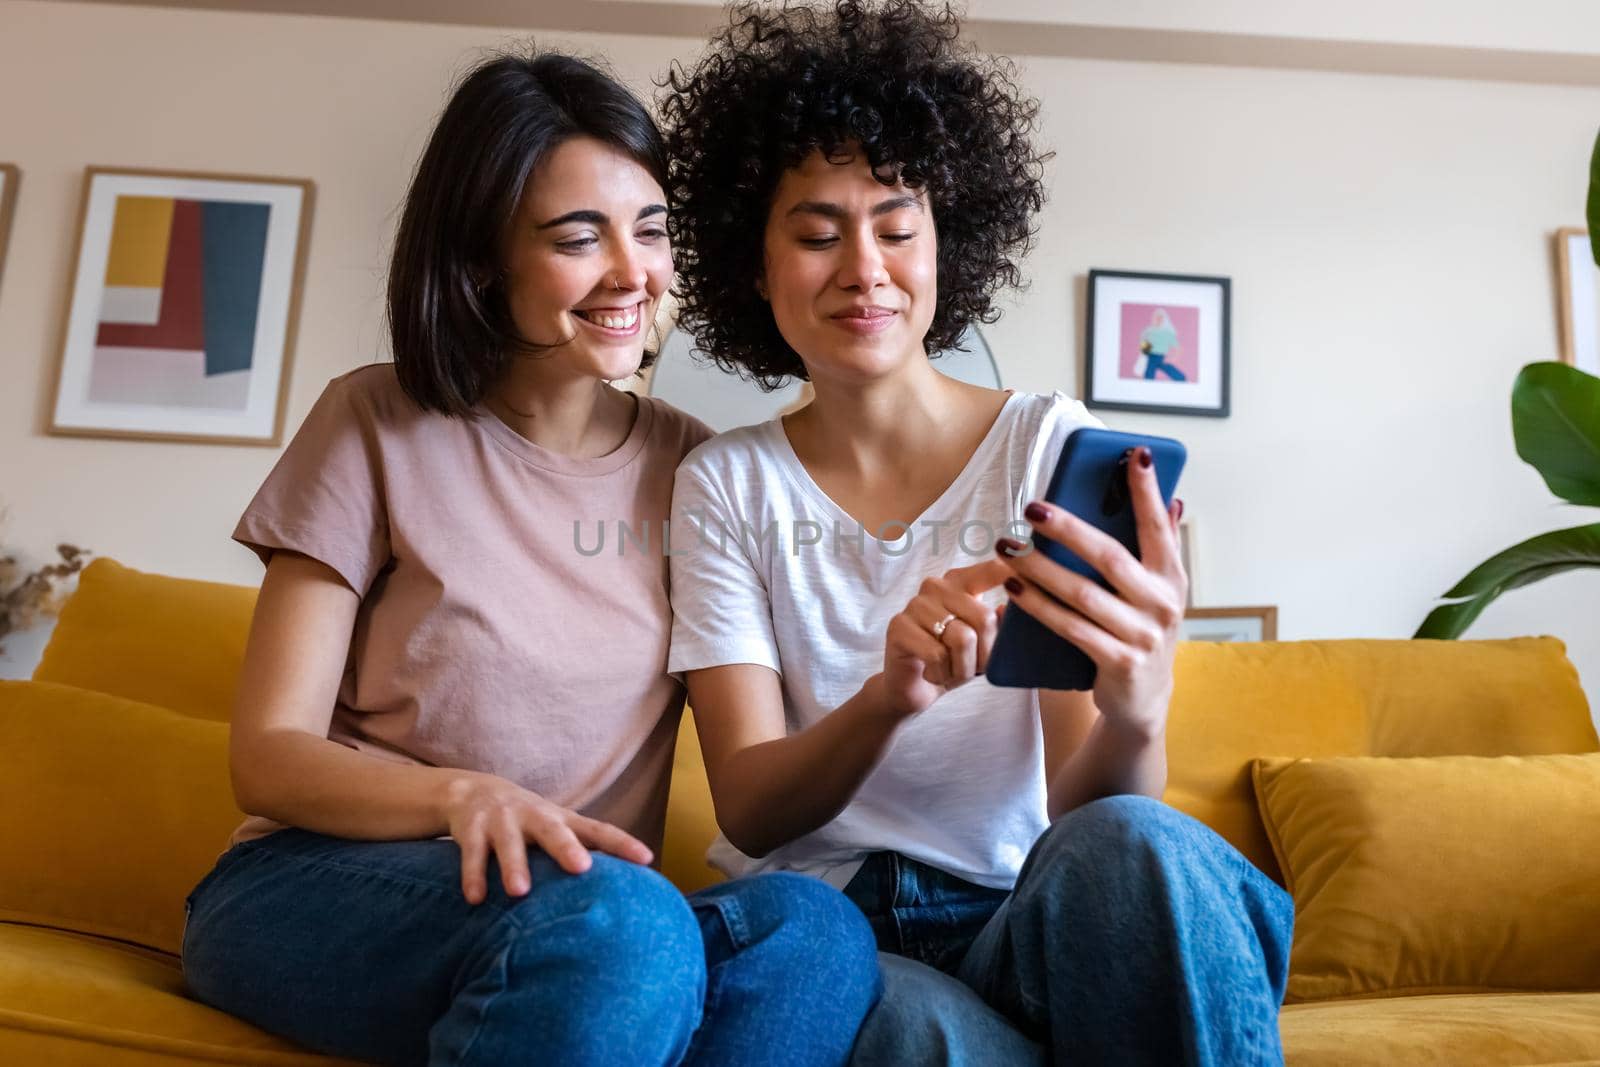 Young multiracial lesbian couple sitting on the couch looking at mobile phone together. Gay couple checking social media. Lgbt people and technology concept.